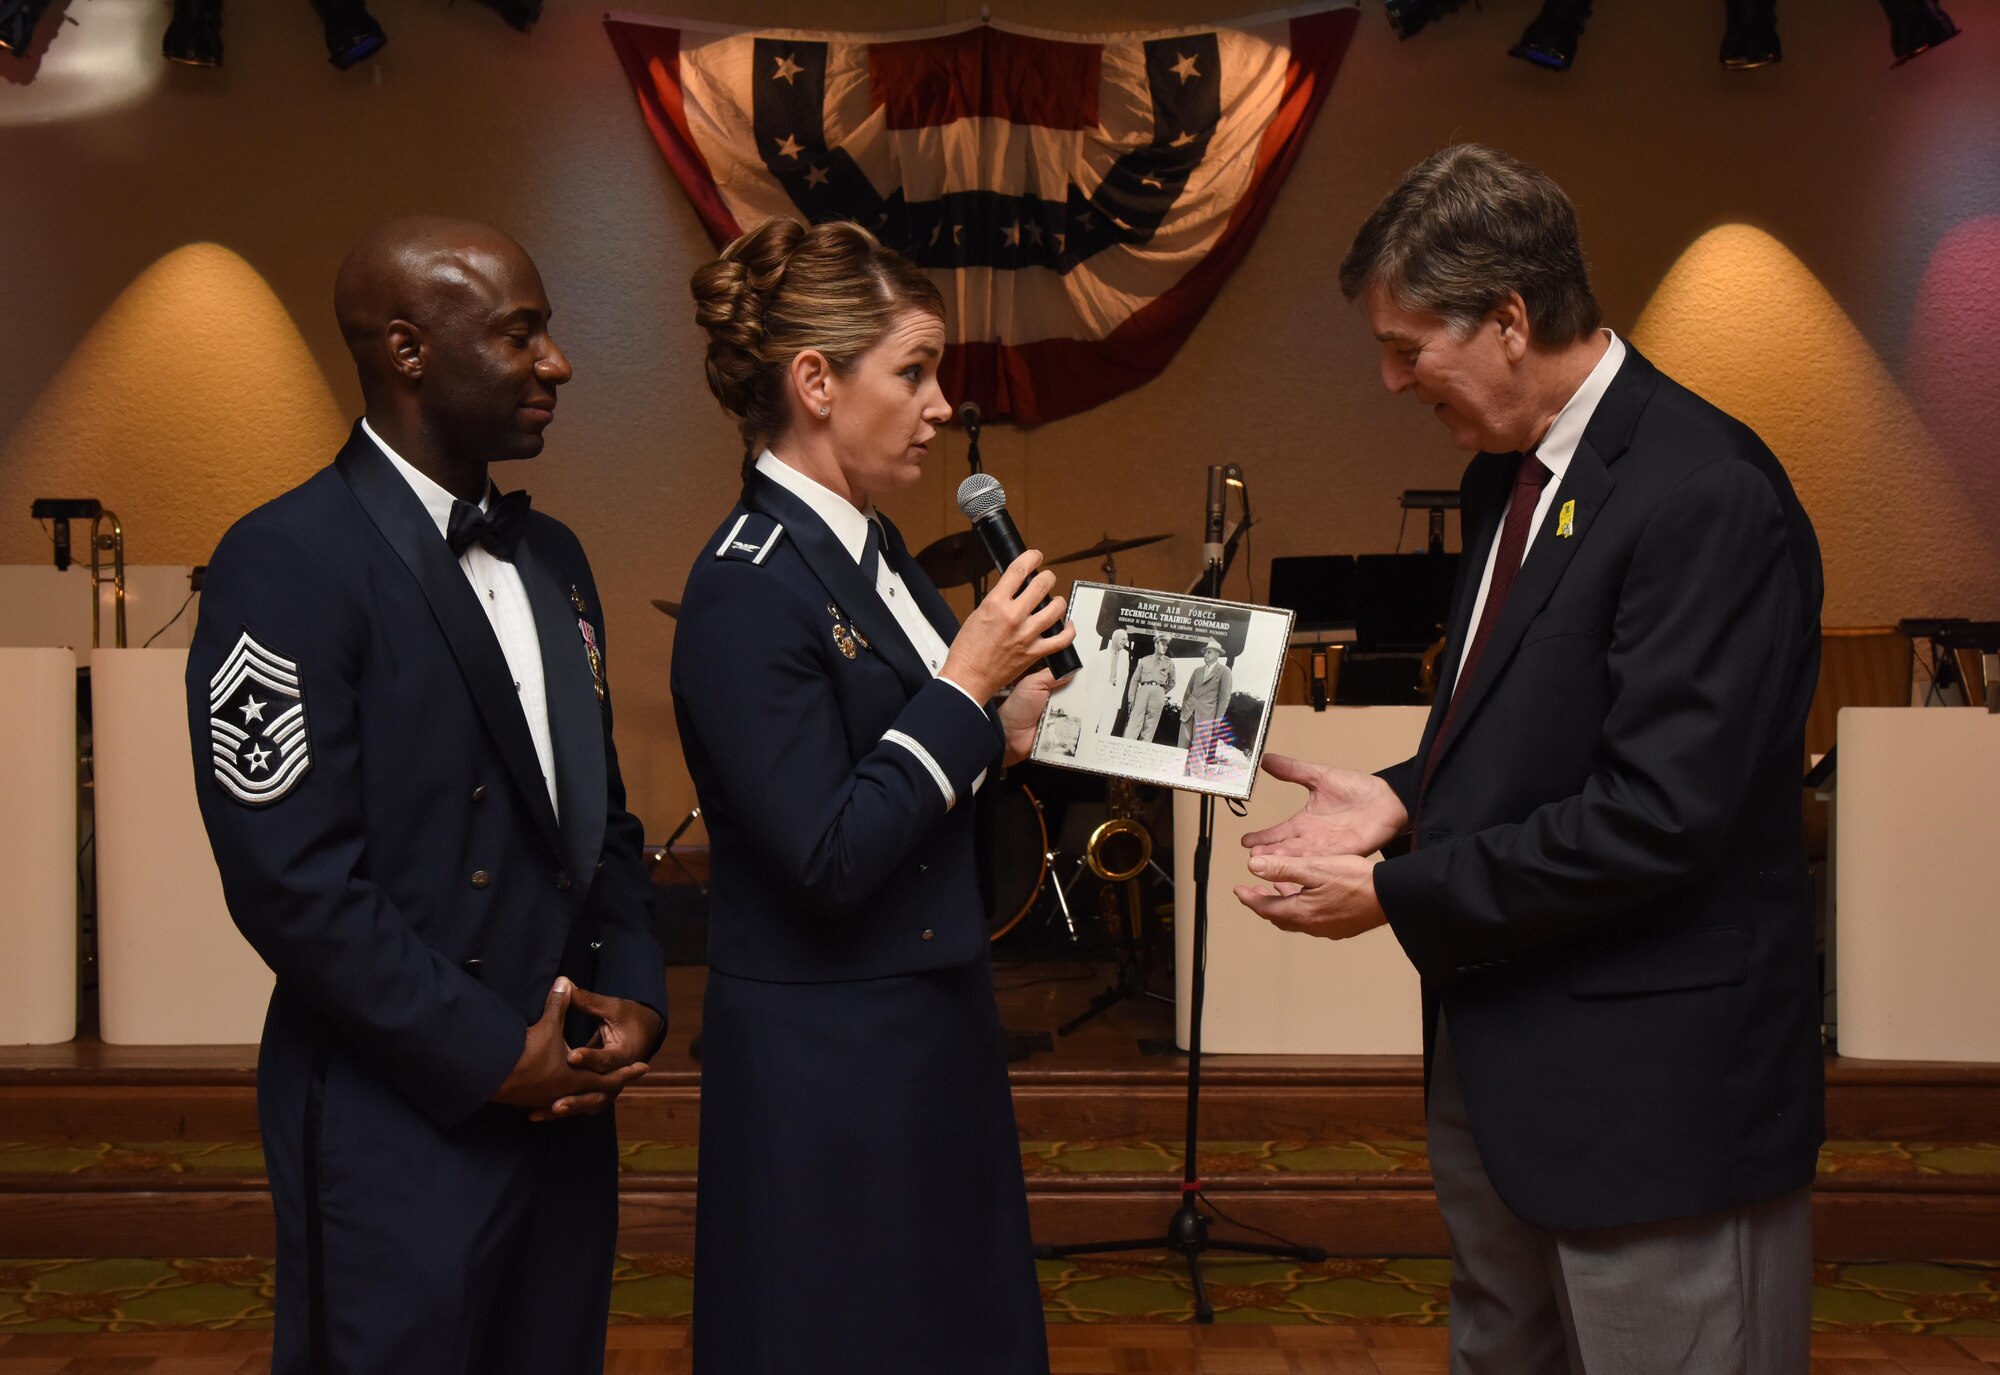 Col. Michele Edmondson, 81st Training Wing commander, and Chief Master Sgt. Vegas Clark, 81st TRW command chief, present a historical photo to Andrew Gilich, Biloxi mayor, during the installation’s 75th Anniversary Gala at the Bay Breeze Event Center Nov. 4, 2016, on Keesler Air Force Base, Miss. The celebration commemorated Keesler’s 75 years of history with historical displays, throwback trivia, musical and dance performances and recognition of family members of Lt. Samuel Keesler, Jr. (U.S. Air Force photo by Kemberly Groue/Released)